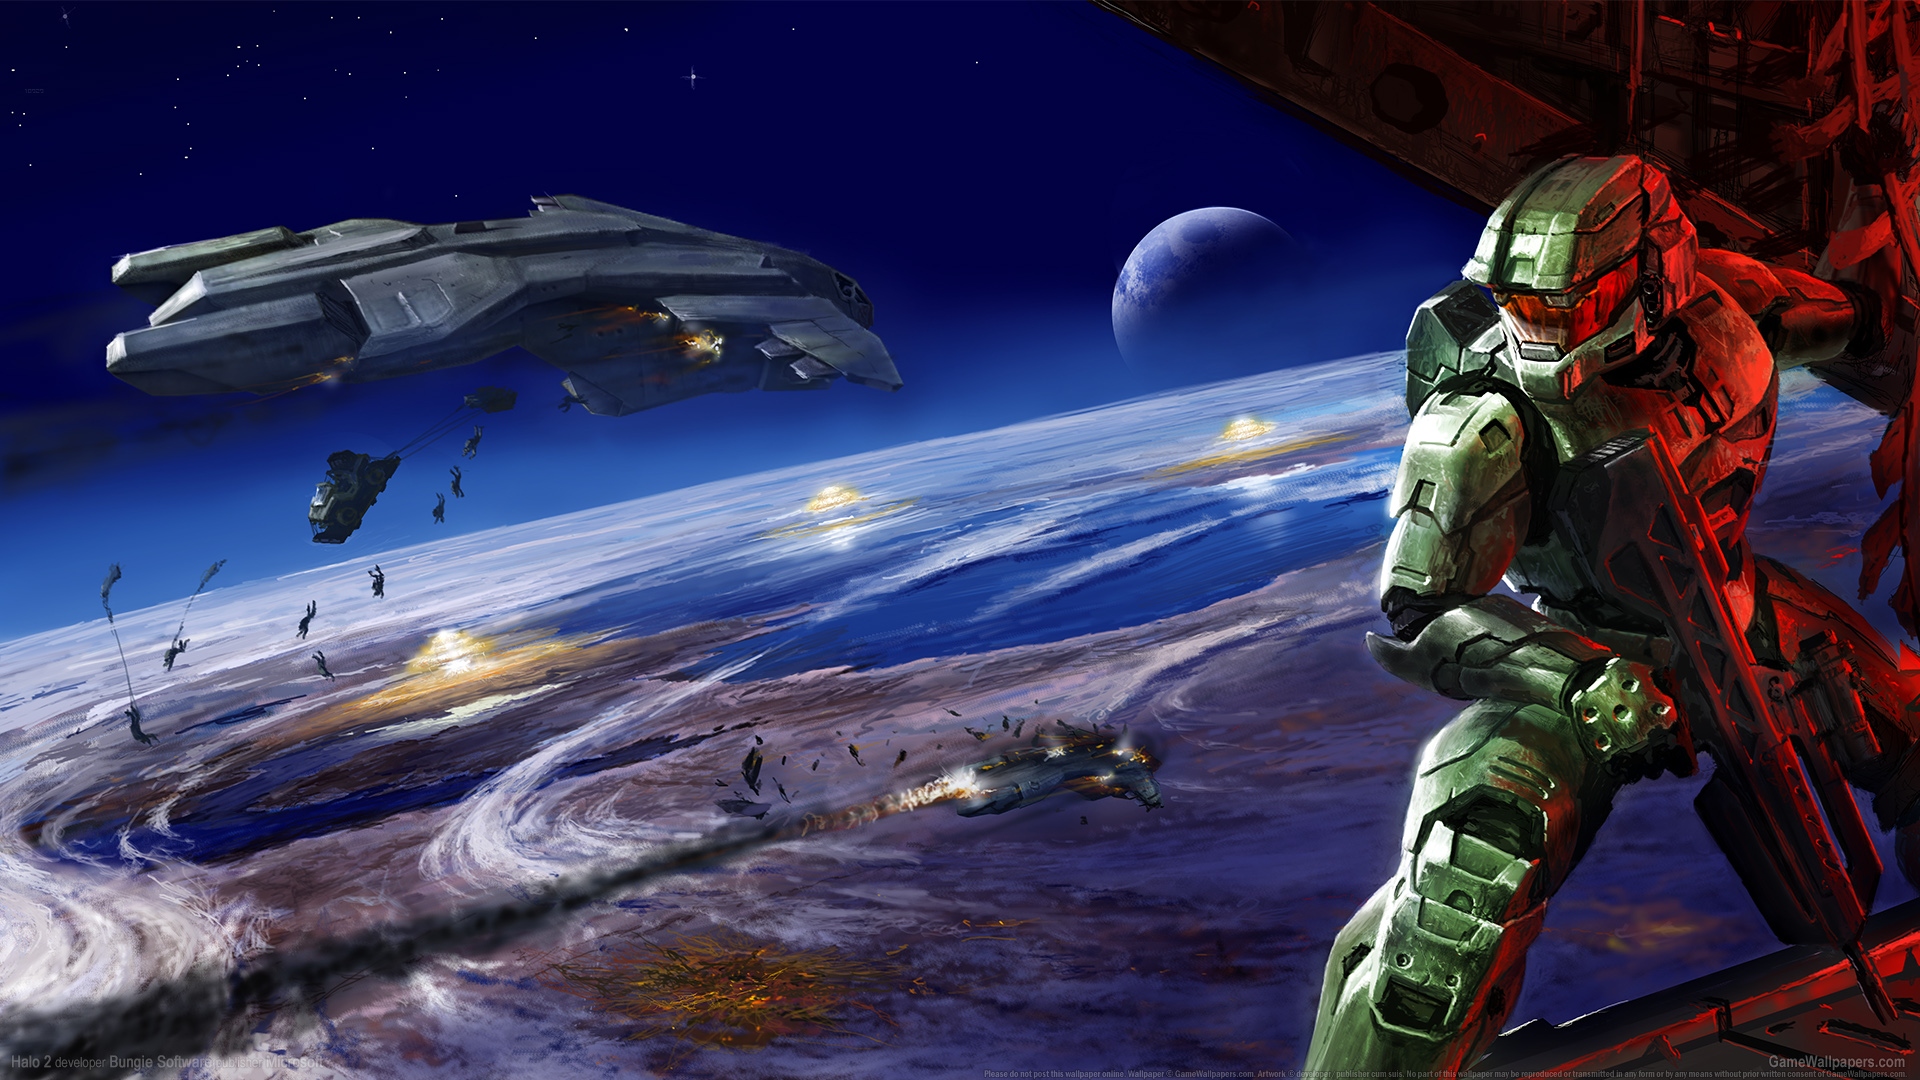 Halo 2 1920x1080 wallpaper or background 18